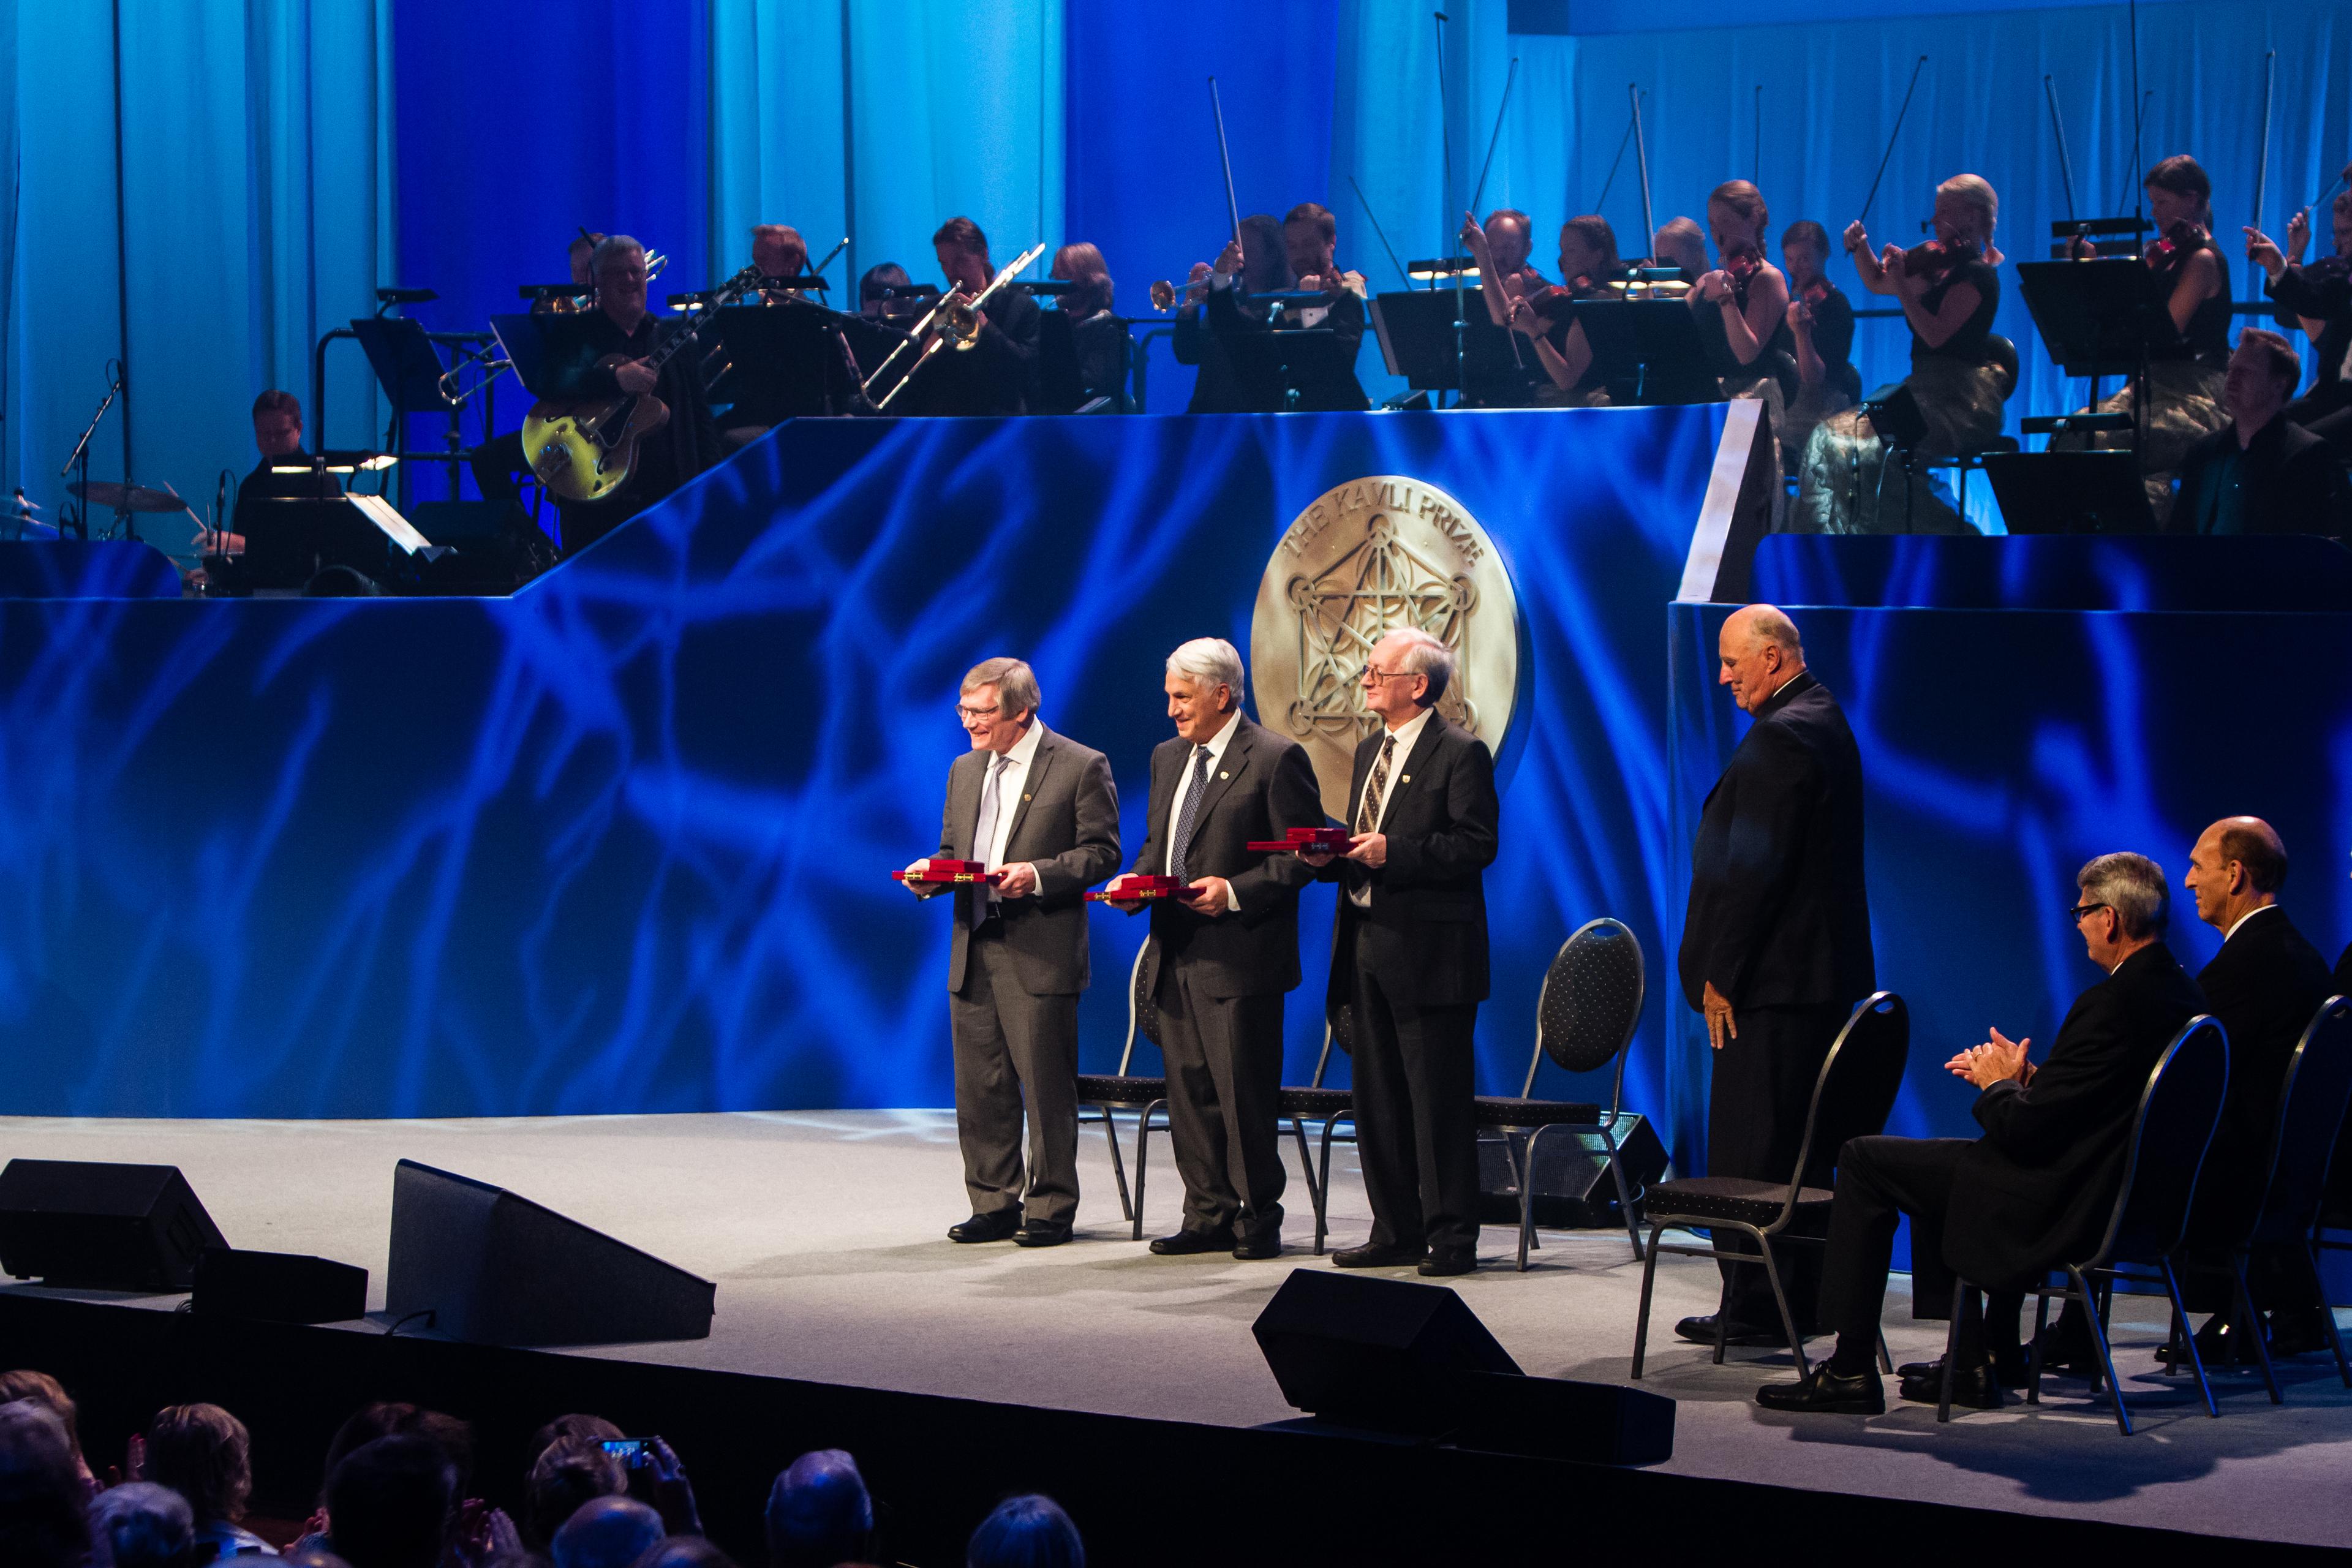 All the three 2014 astrophysics Kavli Prize laureates on stage